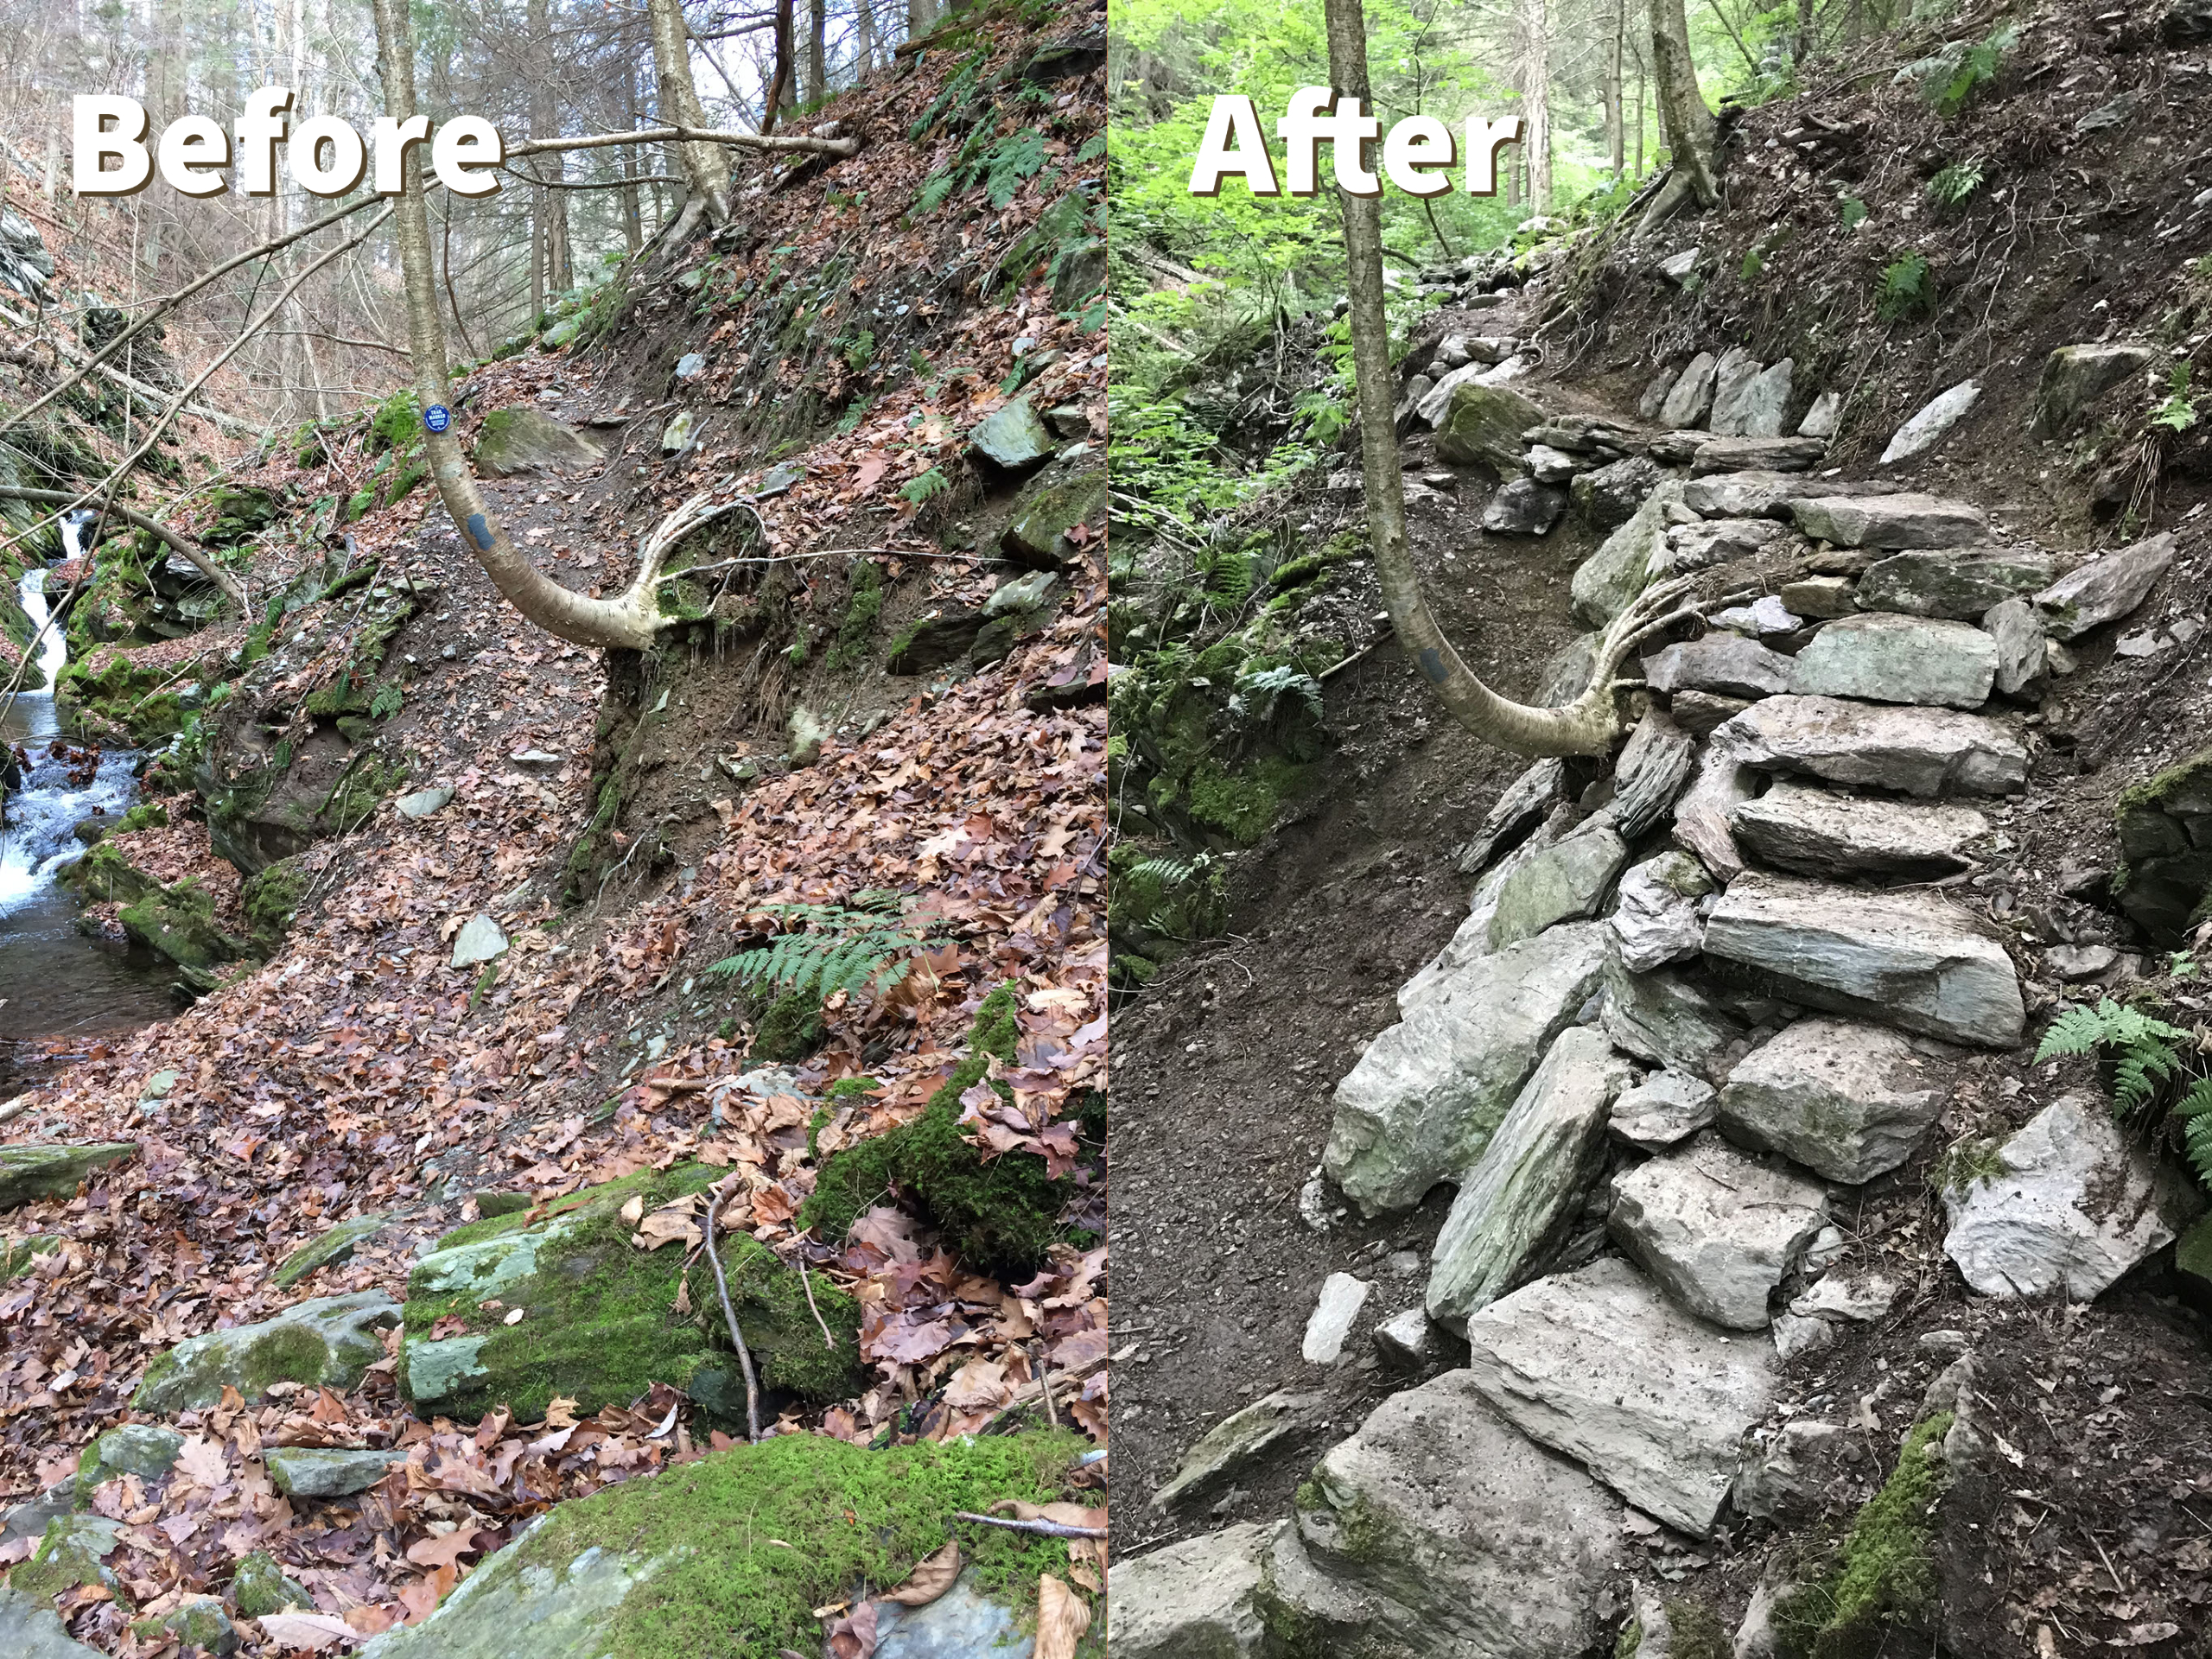 Before and after trail improvements on Taconic State Park's Cedar Brook Trail.